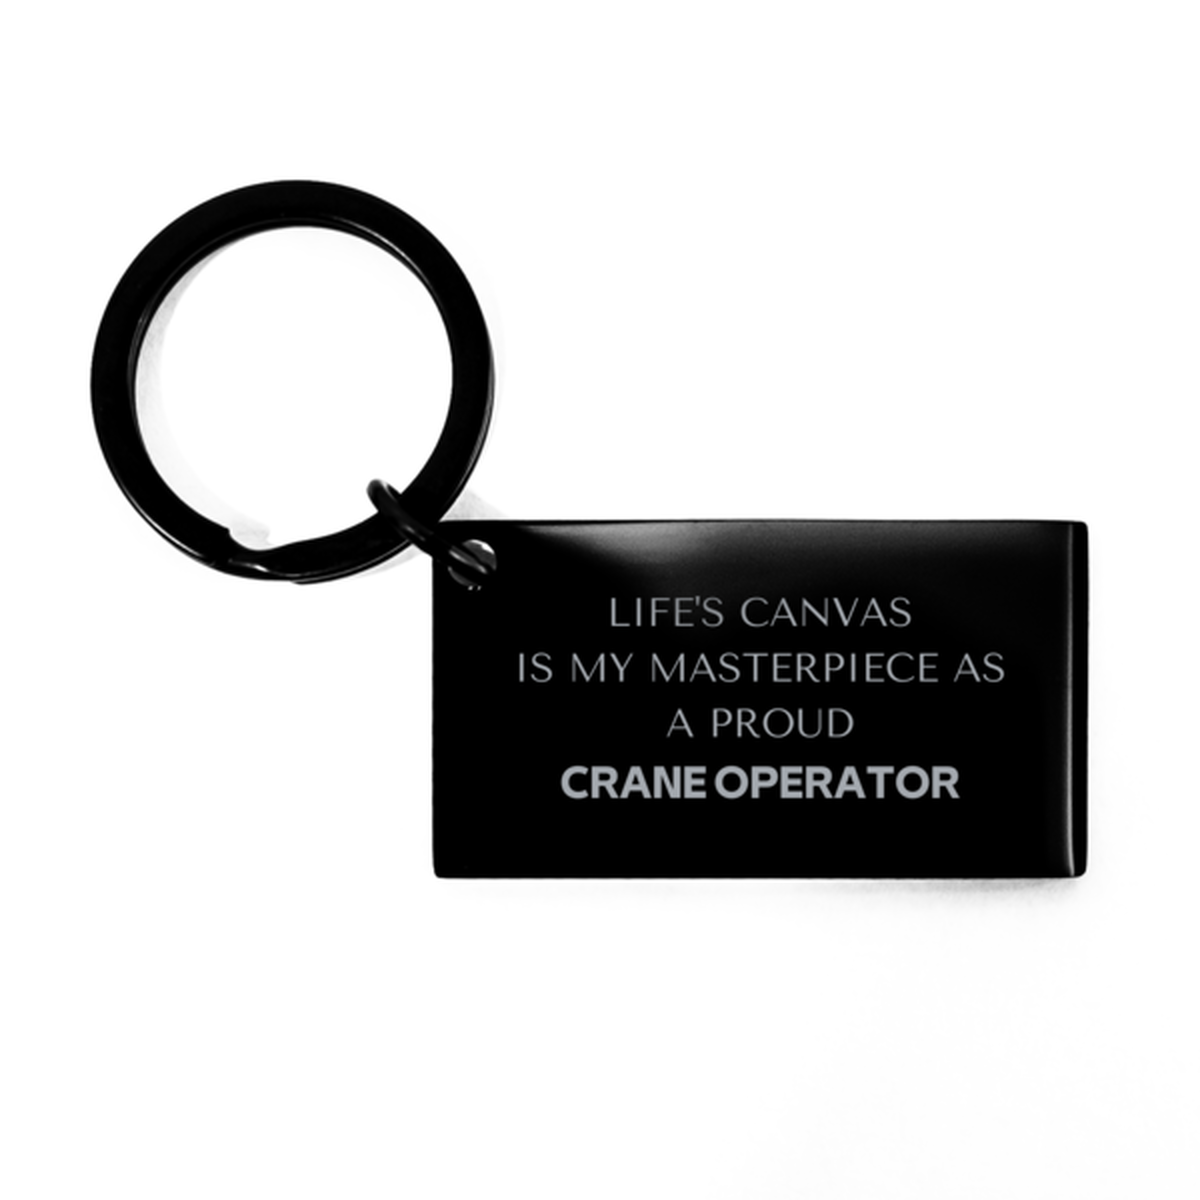 Proud Crane Operator Gifts, Life's canvas is my masterpiece, Epic Birthday Christmas Unique Keychain For Crane Operator, Coworkers, Men, Women, Friends